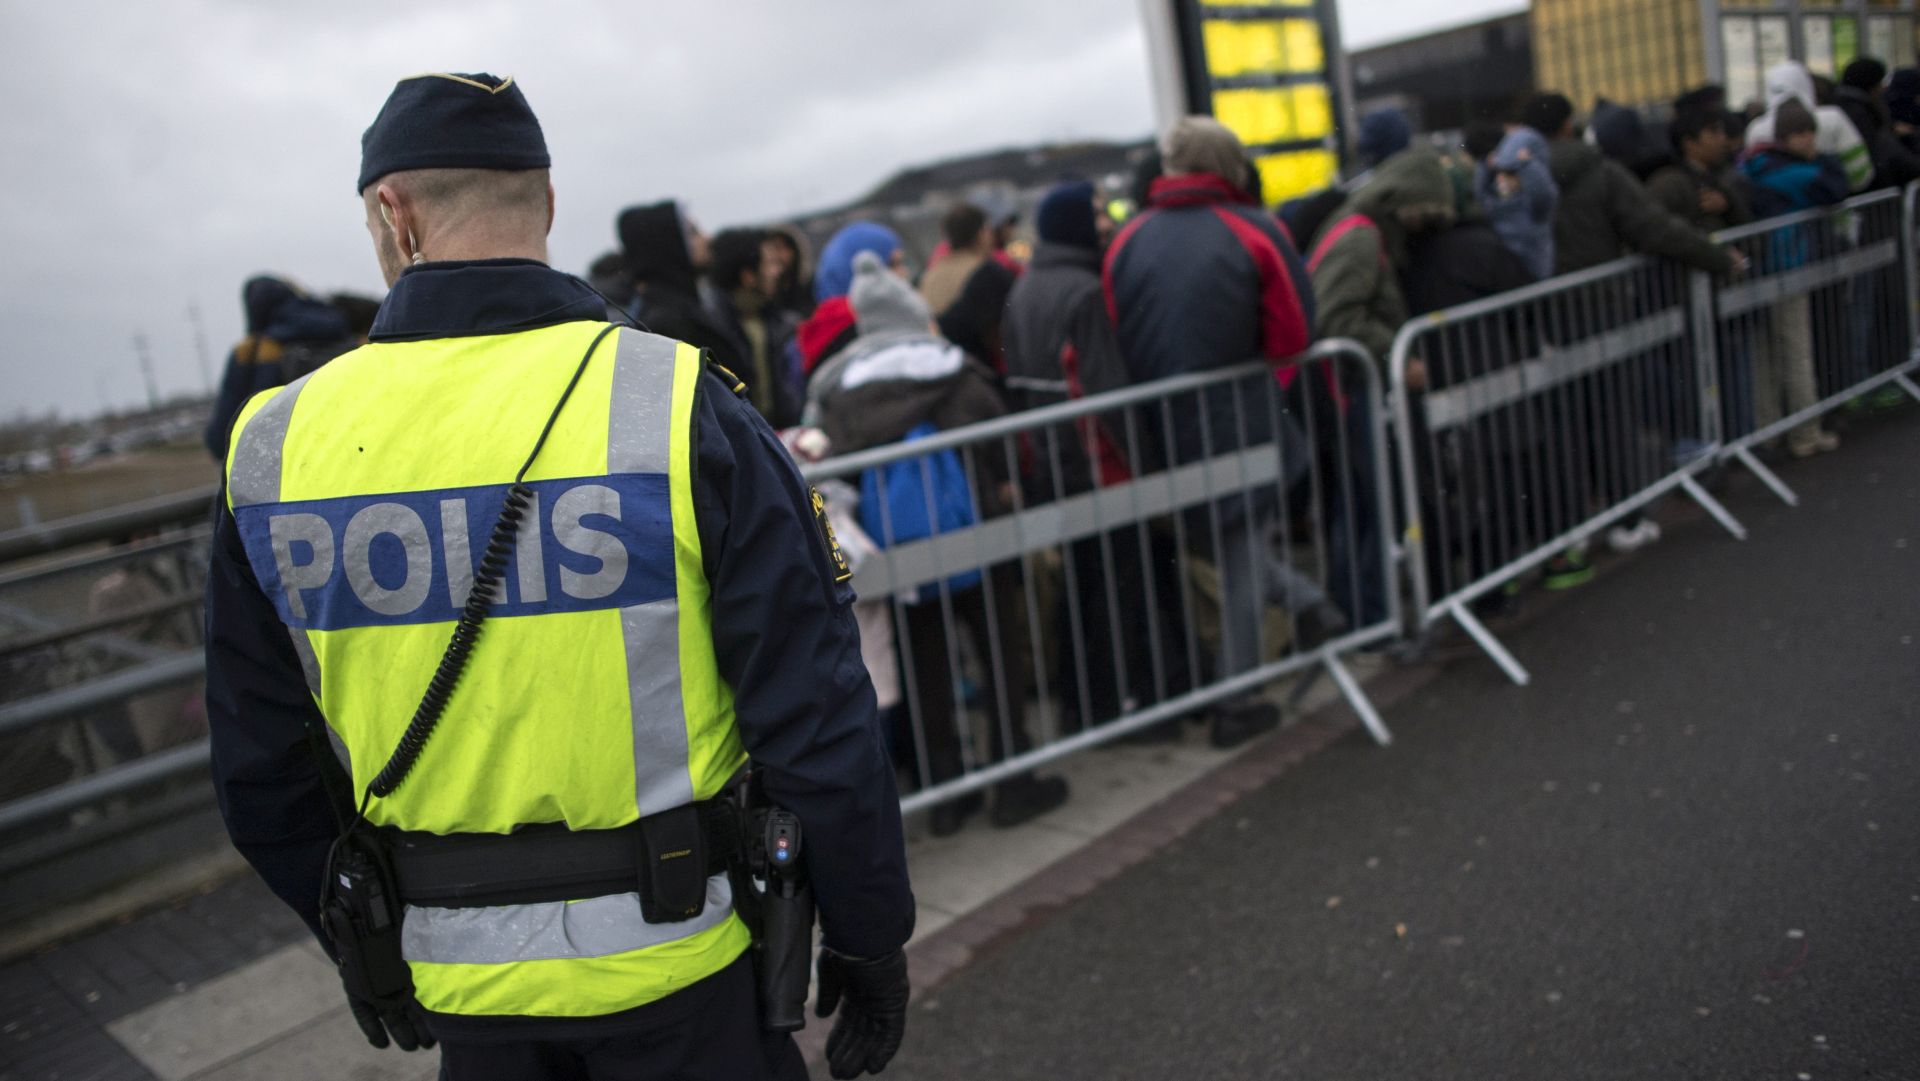 epa05131191 A picture made available 28 January 2016 shows a Swedish policeman watching newly arrived refugees at Hyllie station outside Malmoe, Sweden, 19 November 2015. Sweden is preparing for the expulsion of up to 80,000 people whose asylum bids have been rejected, a cabinet member said 28 January 2016. A record 163,000 people applied for asylum in Sweden in 2015, straining resources and capacity at reception centres and local municipalities. The increase of explusions will be likely only at the beginning of 2017 though, due to the backlog the Swedish Migration Agency was struggeling with.  EPA/JOHAN NILSSON SWEDEN OUT